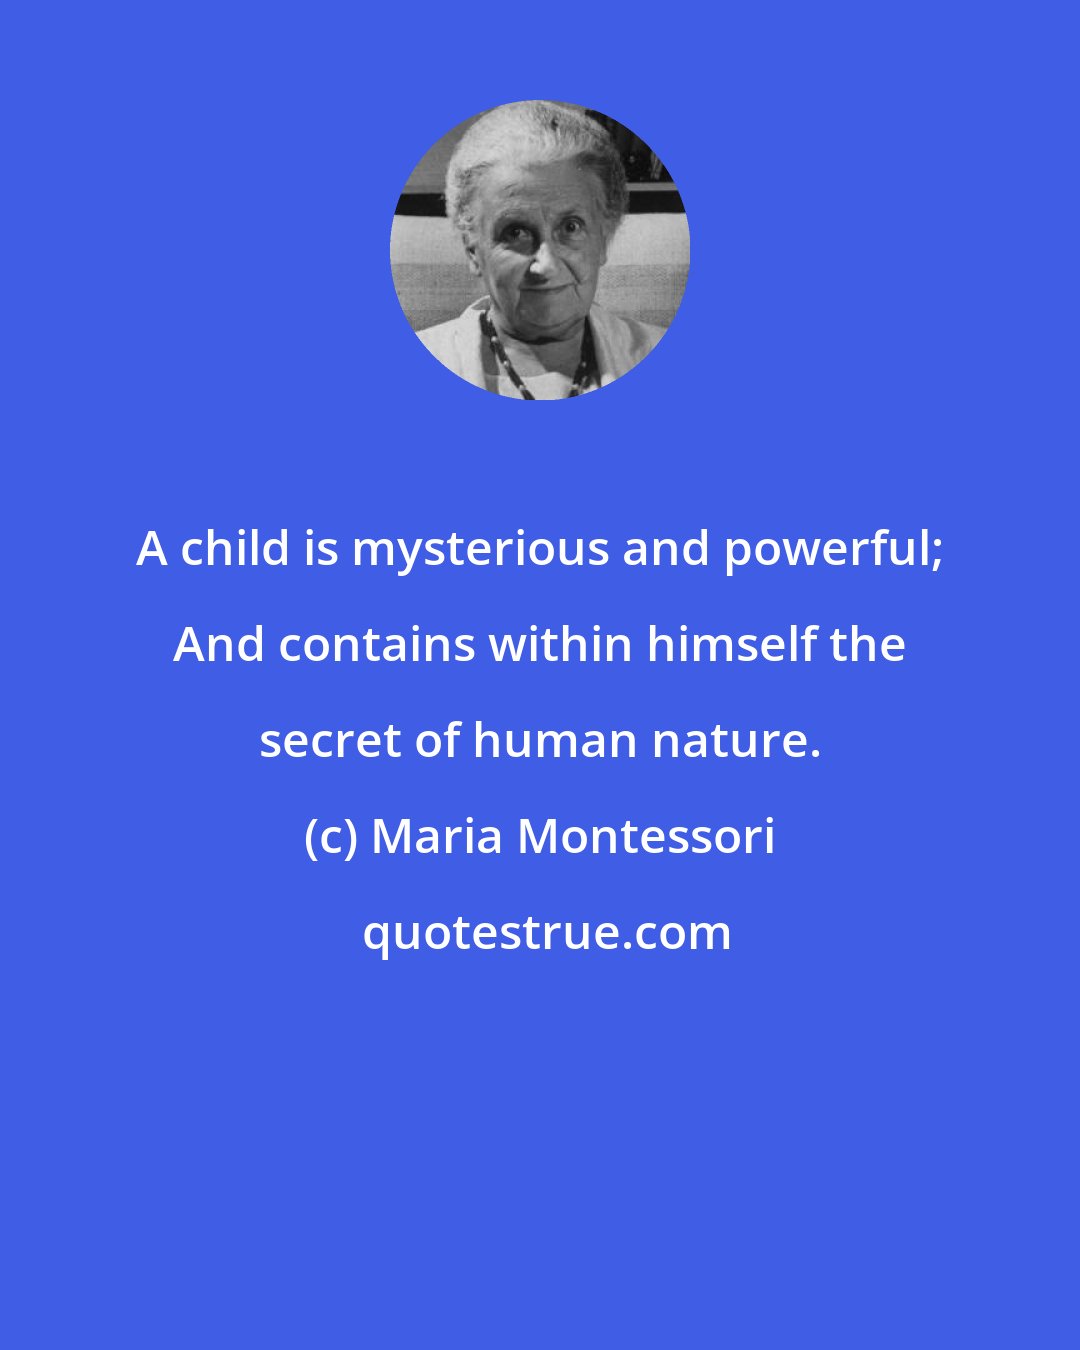 Maria Montessori: A child is mysterious and powerful; And contains within himself the secret of human nature.